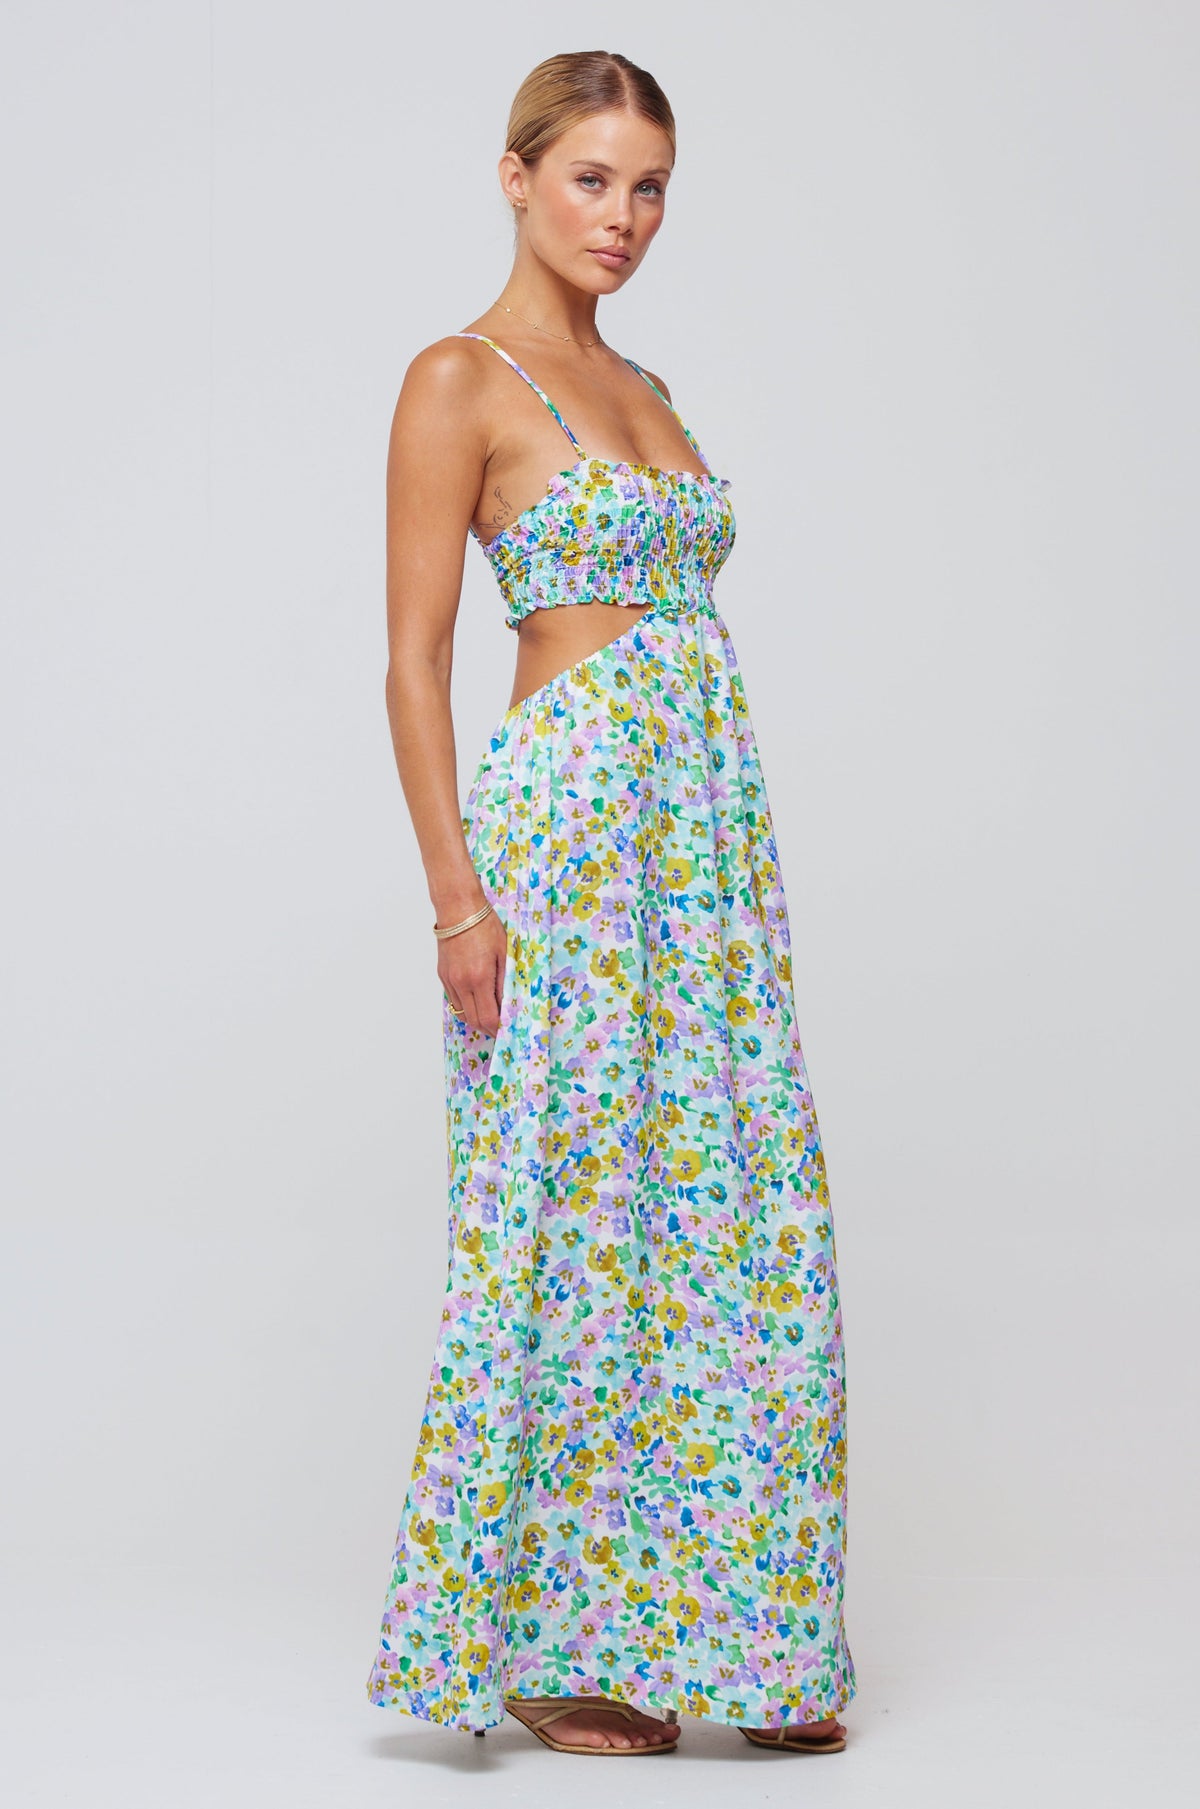 This is an image of Jordan Maxi in Monet - RESA featuring a model wearing the dress